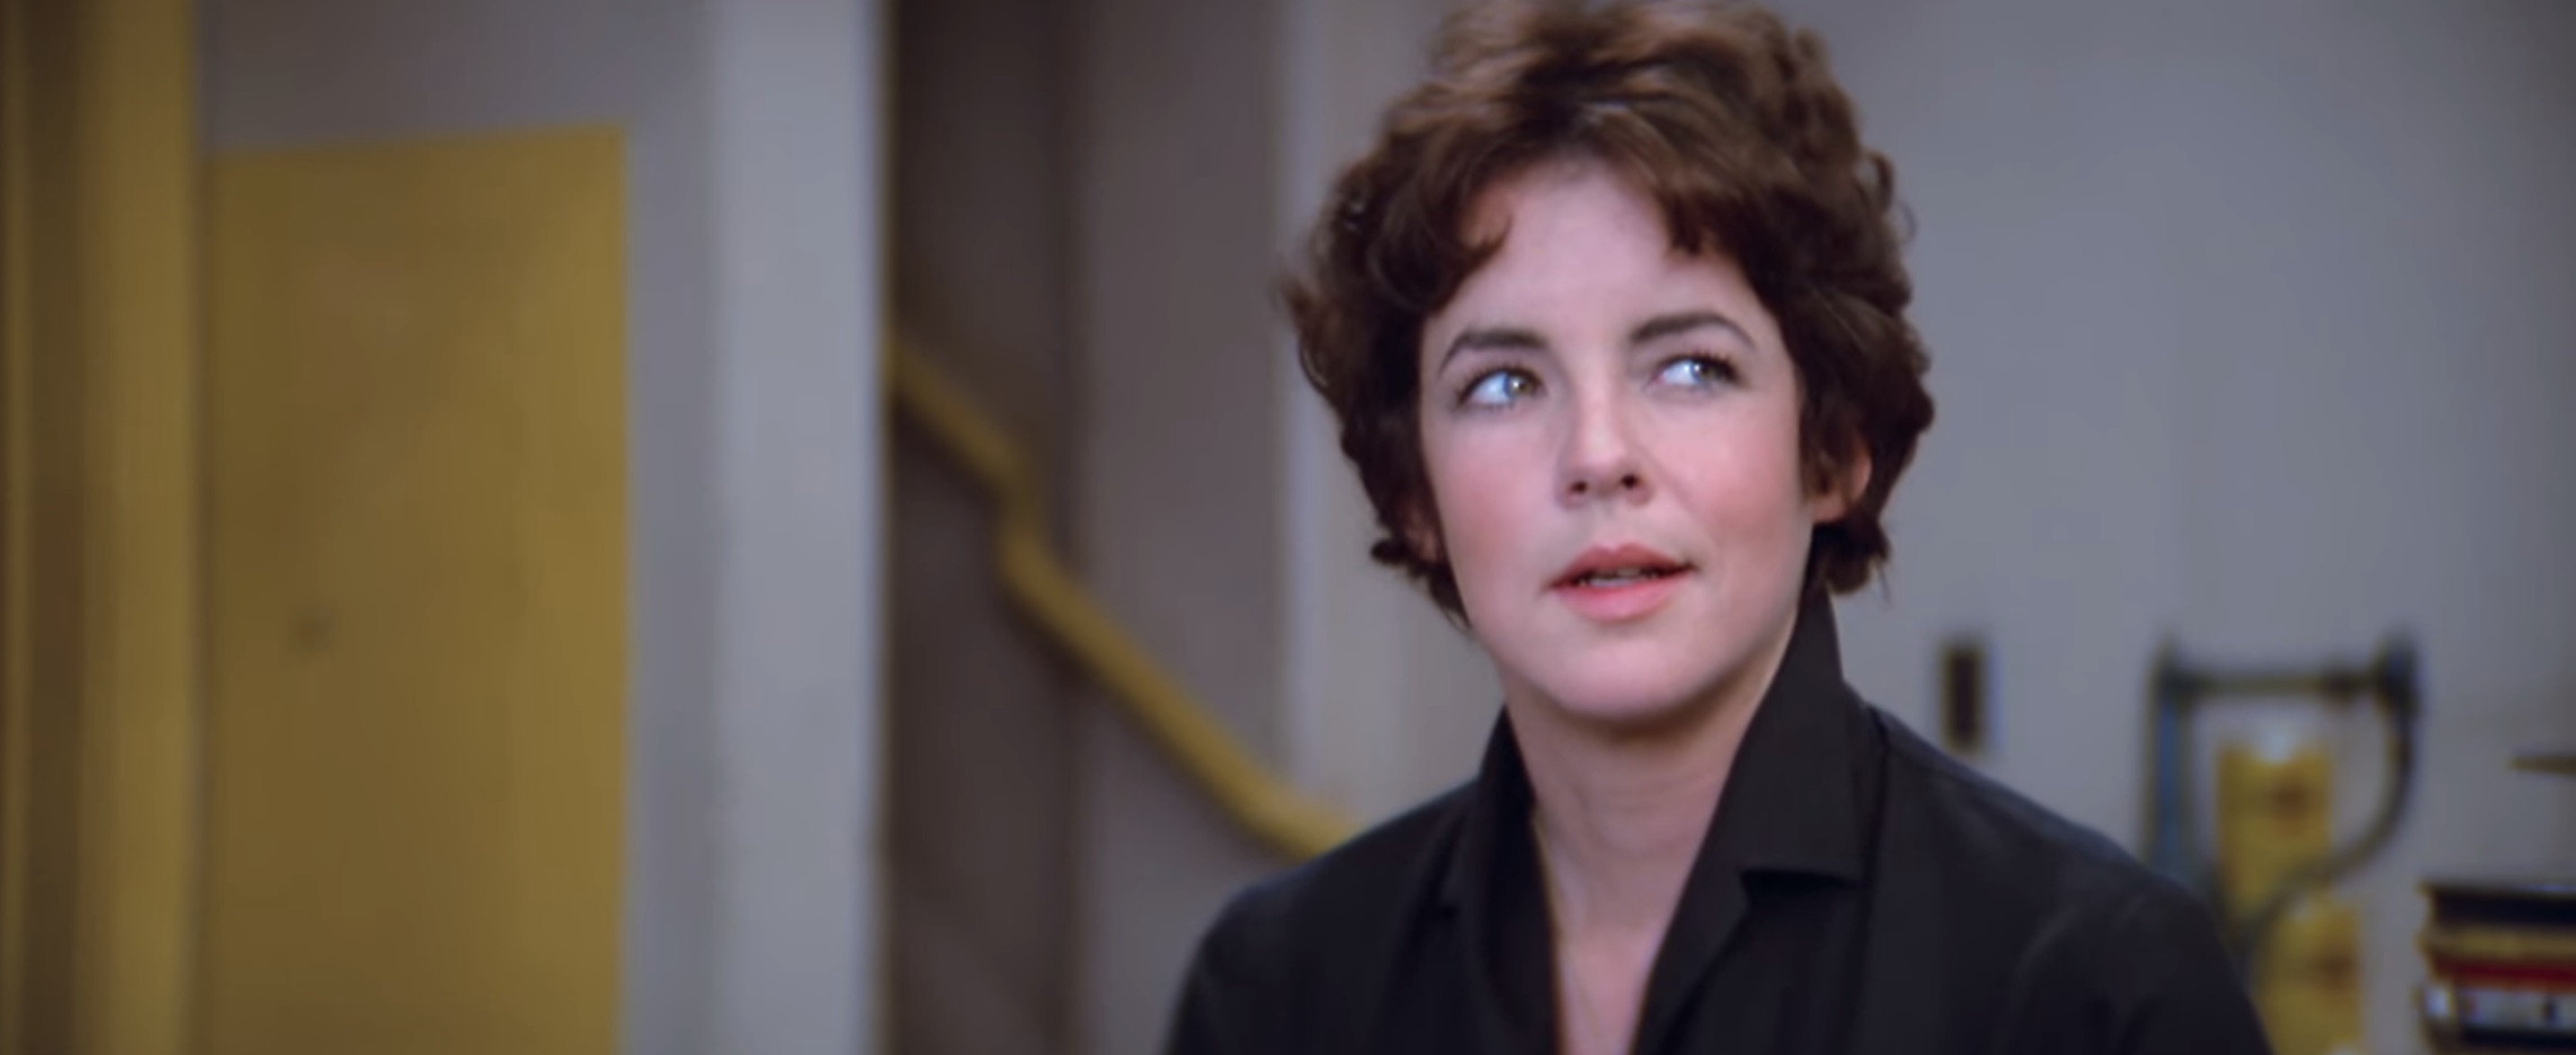 Grease Cast on Netflix - Stockard Channing as Betty Rizzo